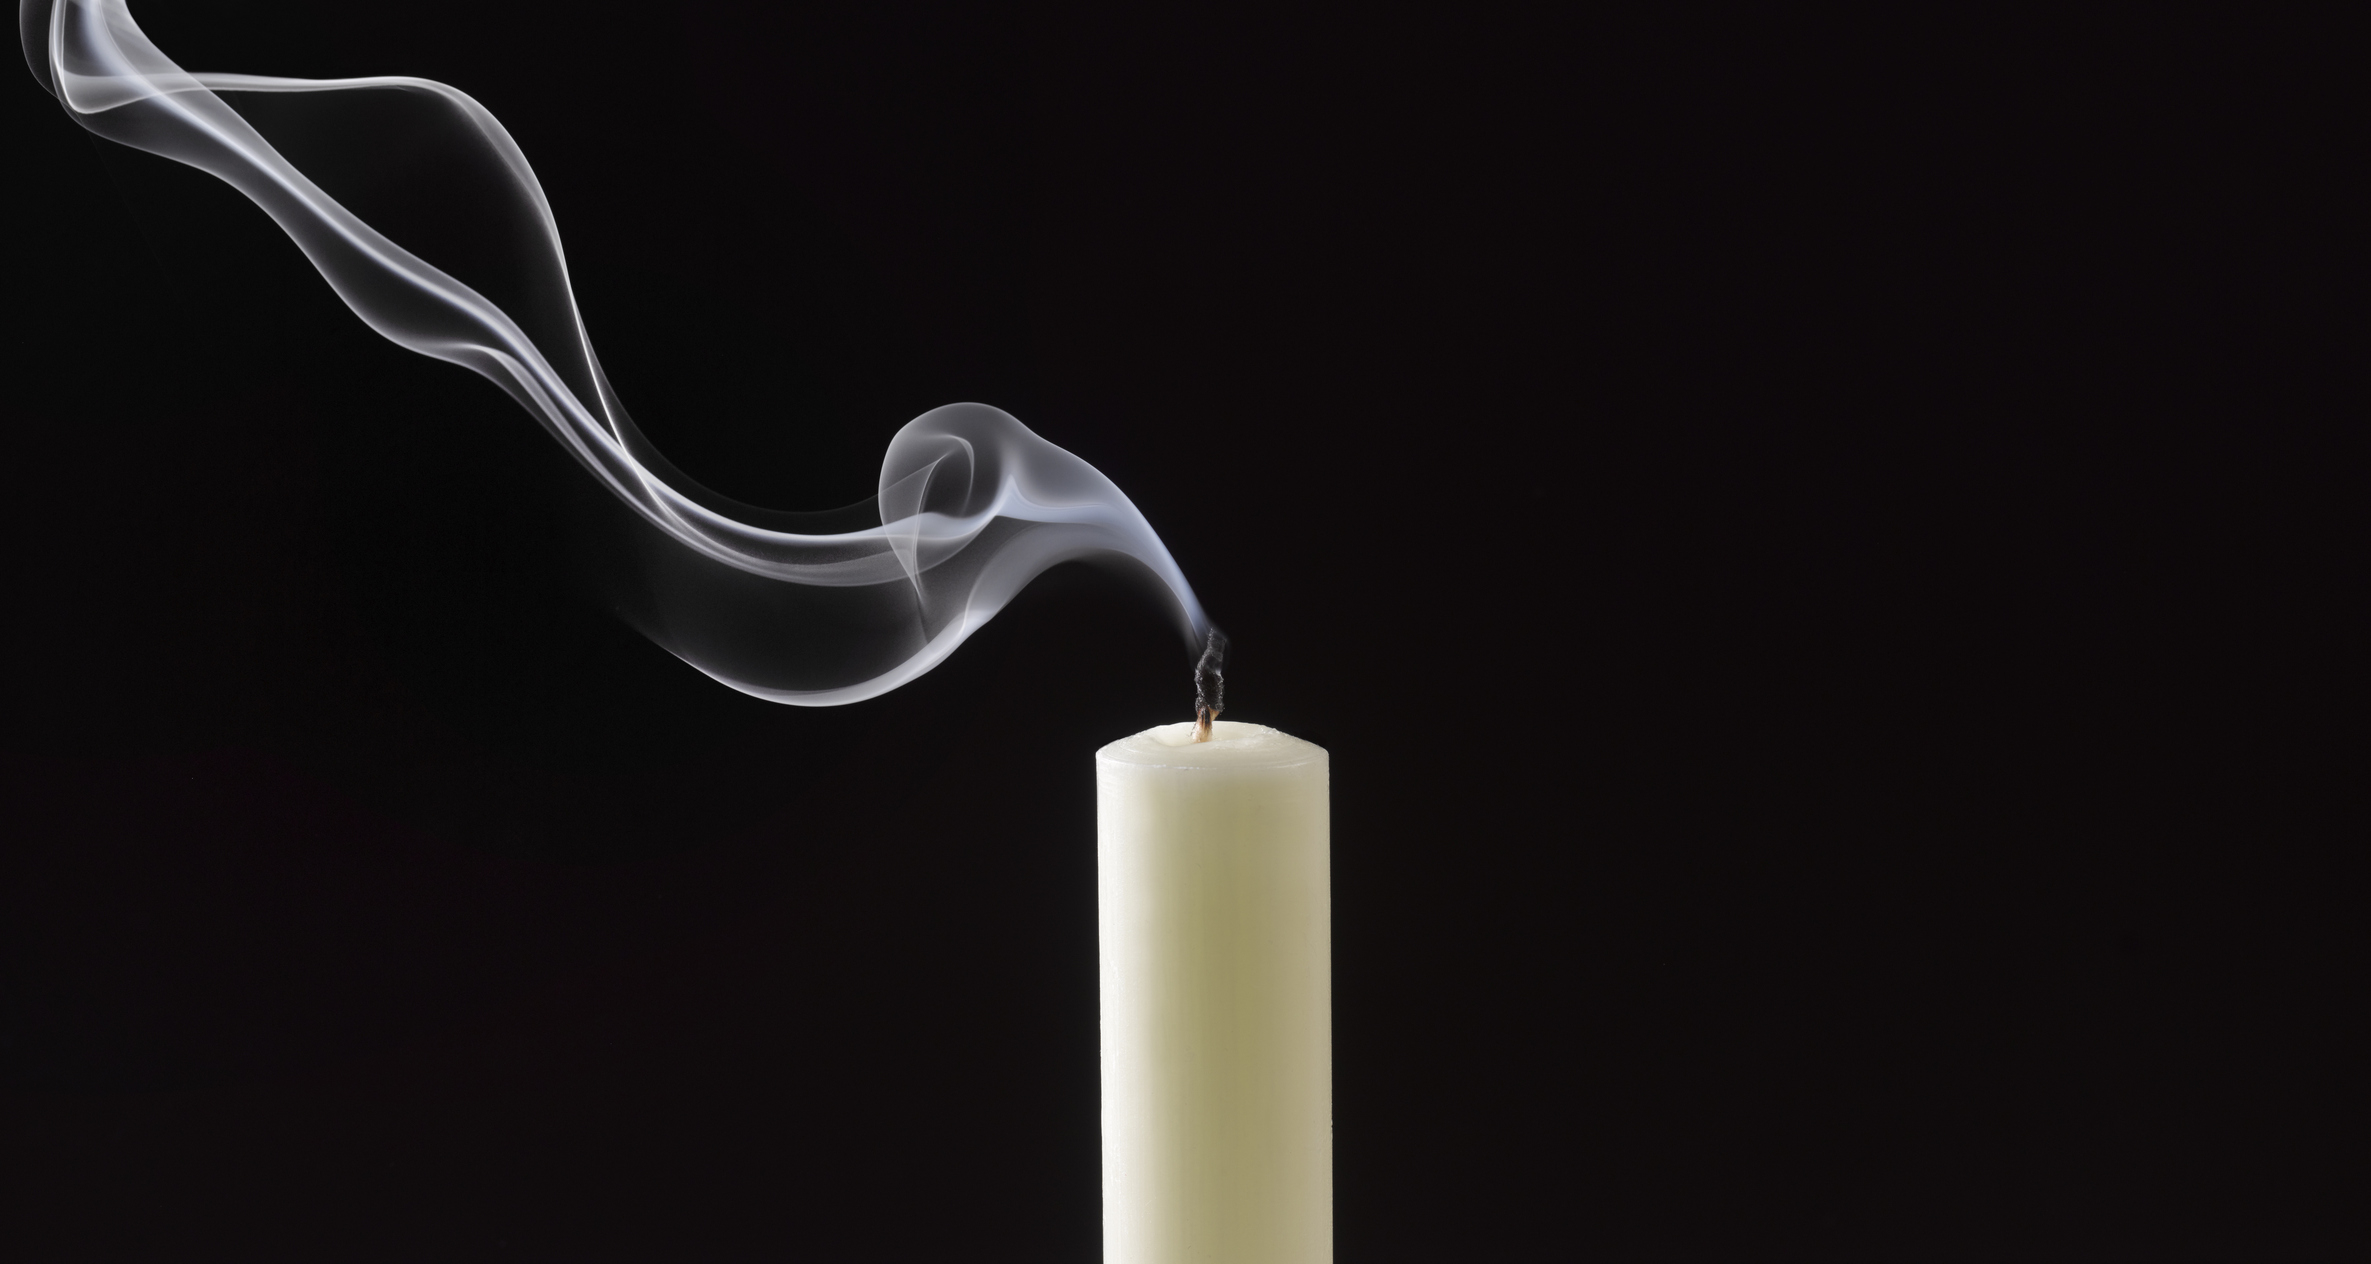 A single candle with a wisp of smoke rising from its extinguished wick against a dark background